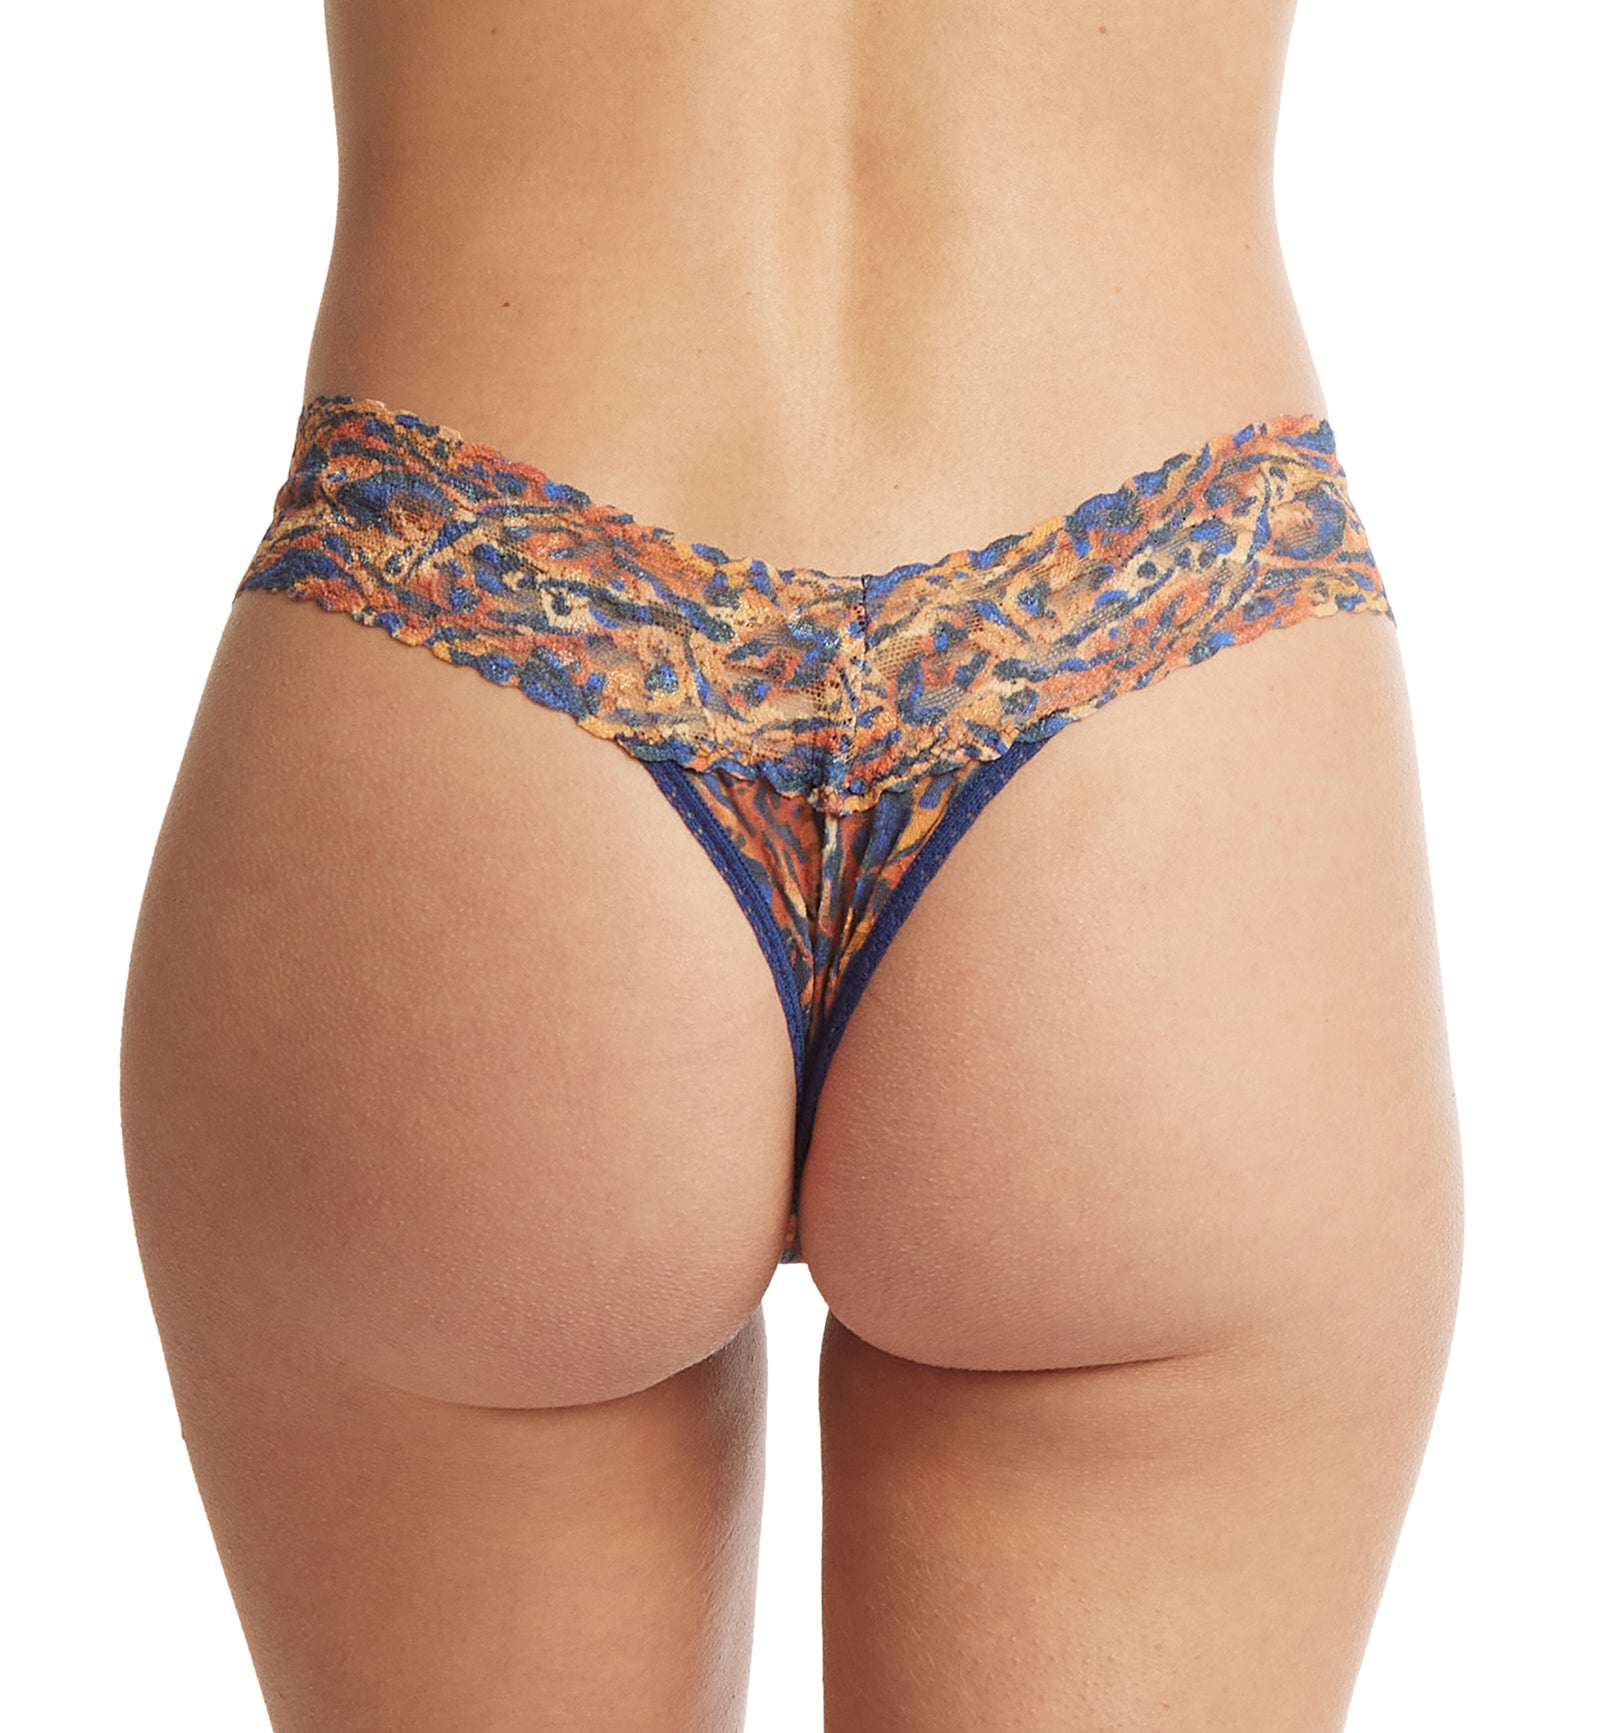 Hanky Panky Signature Lace Printed Low Rise Thong (PR4911P),Wild About Blue - Wild About Blue,One Size